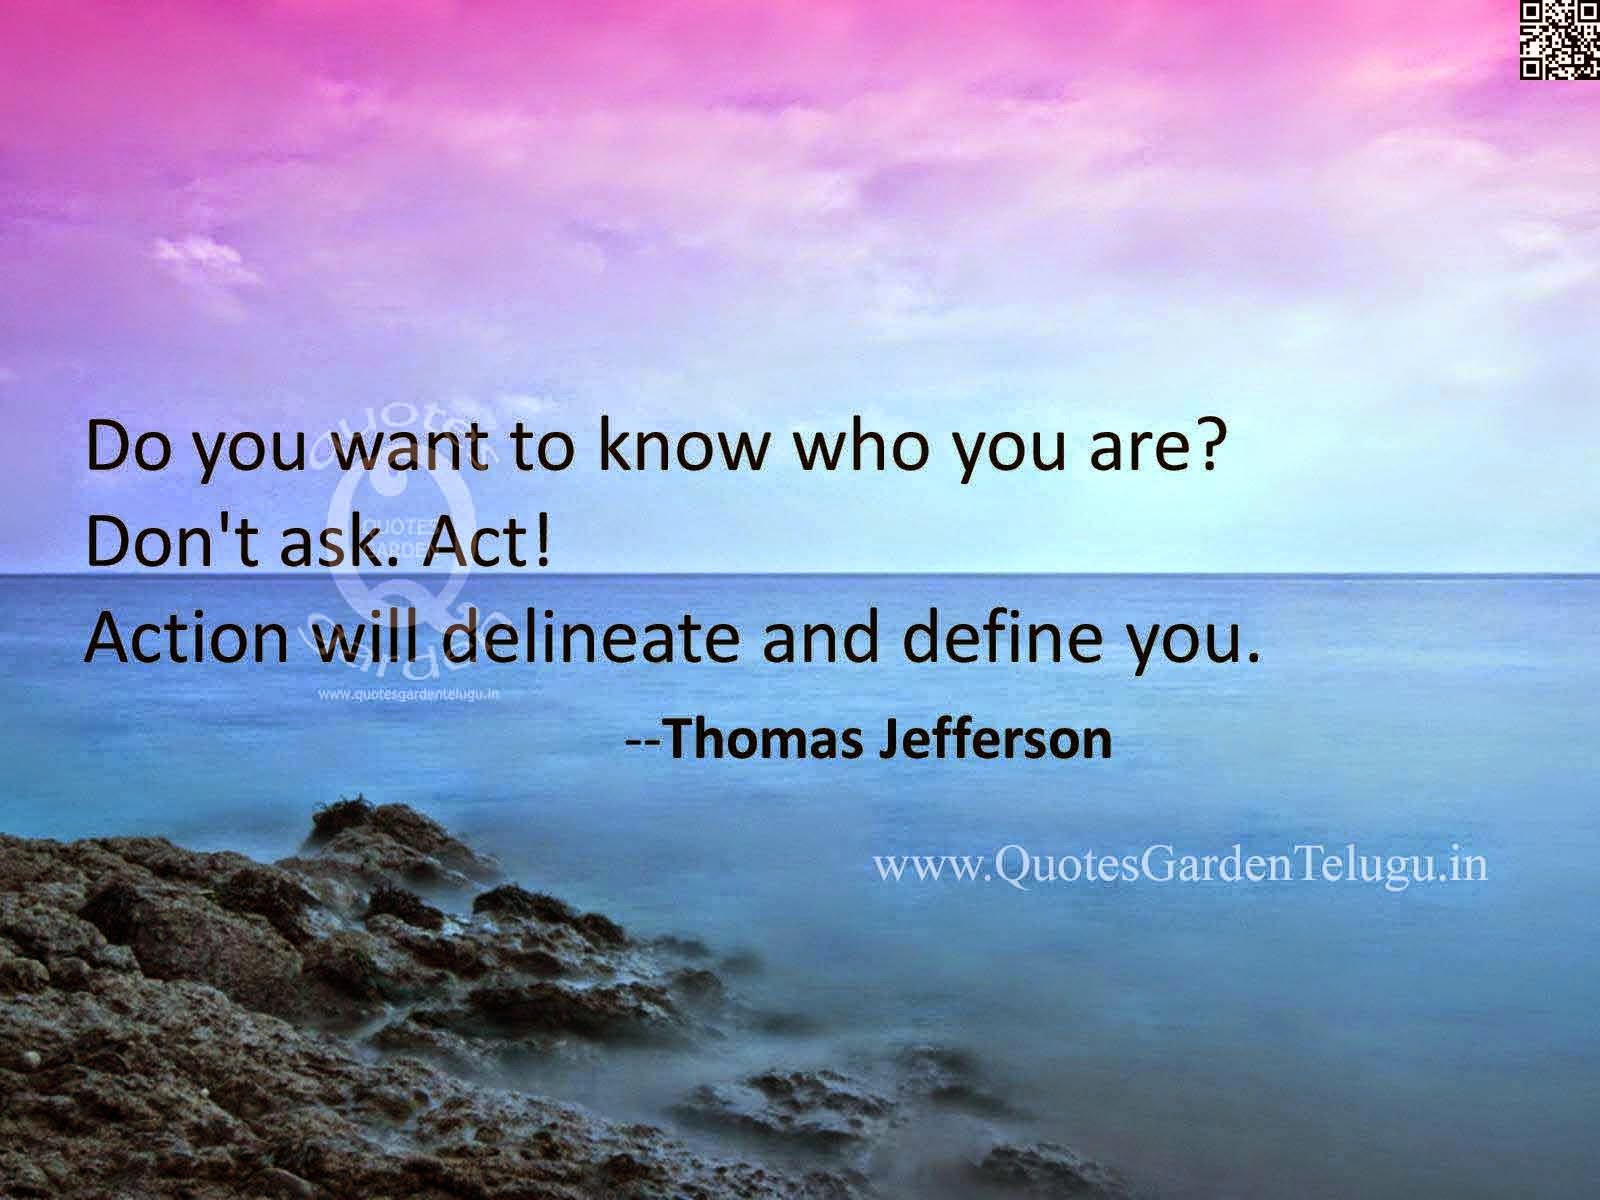 Famous English Success Quotes with images-Inspirational Quotes from Thomas Jefferson